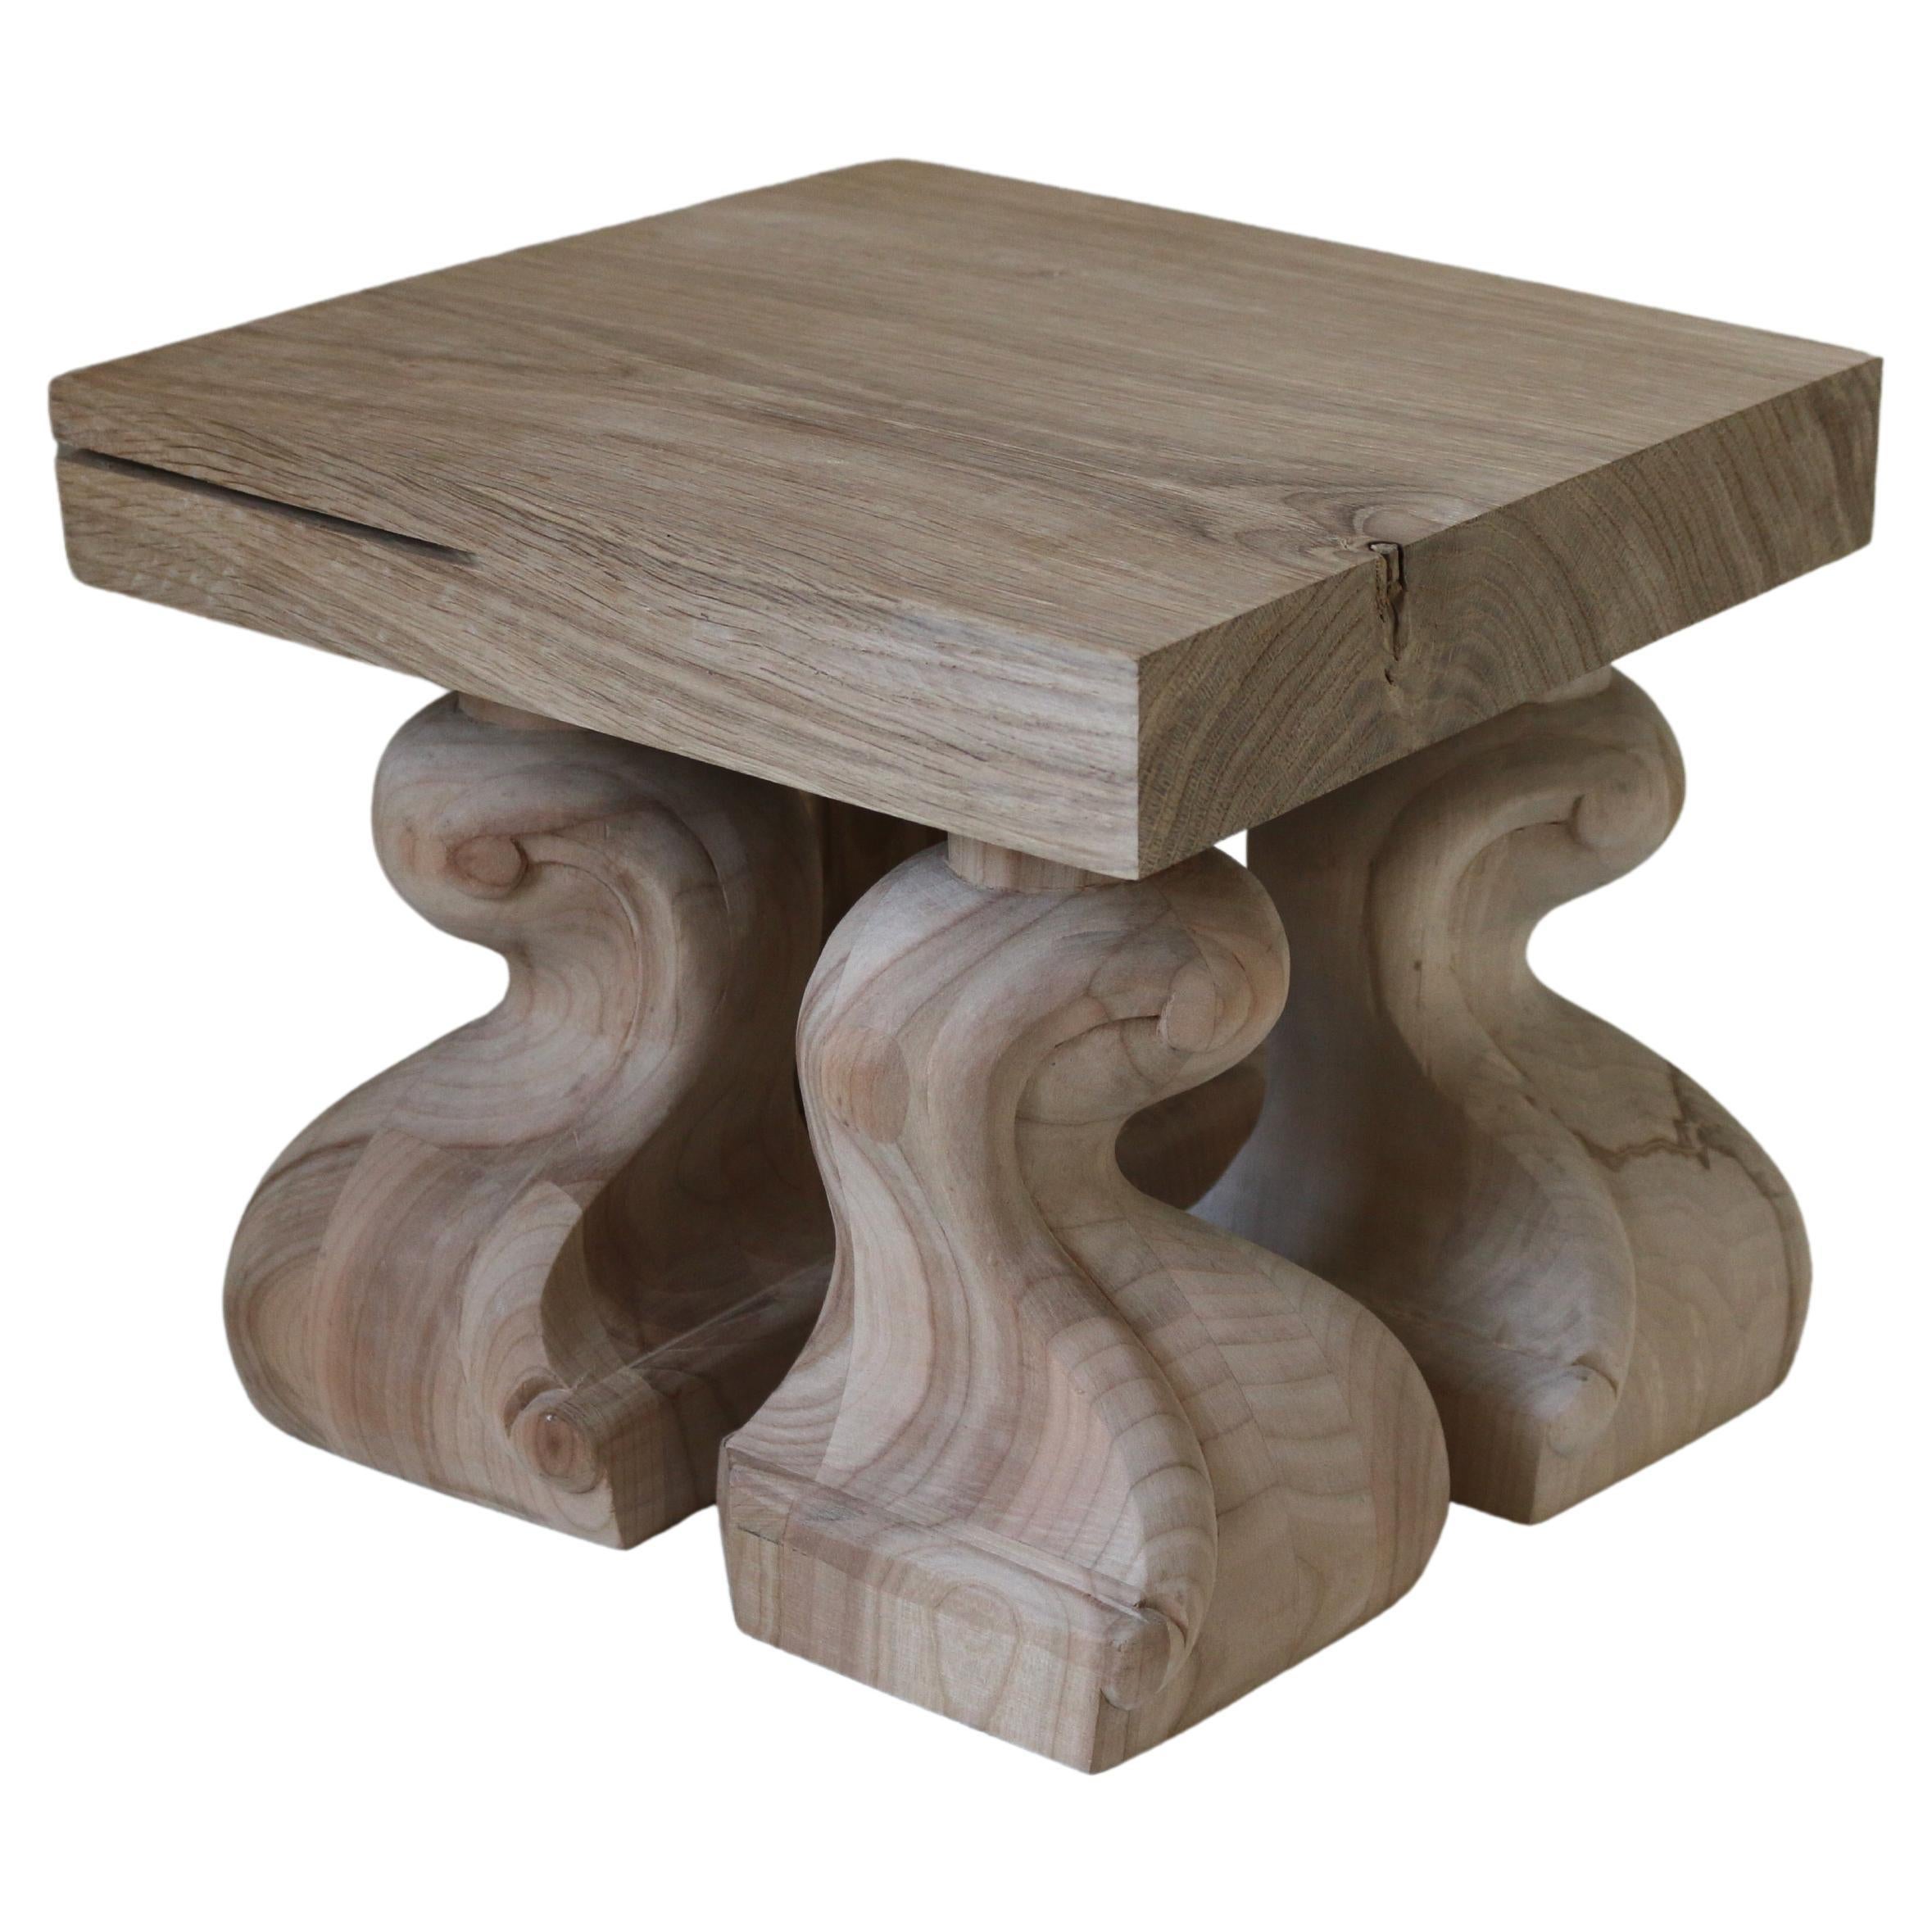 RE:02 raw sculpted wood side table 